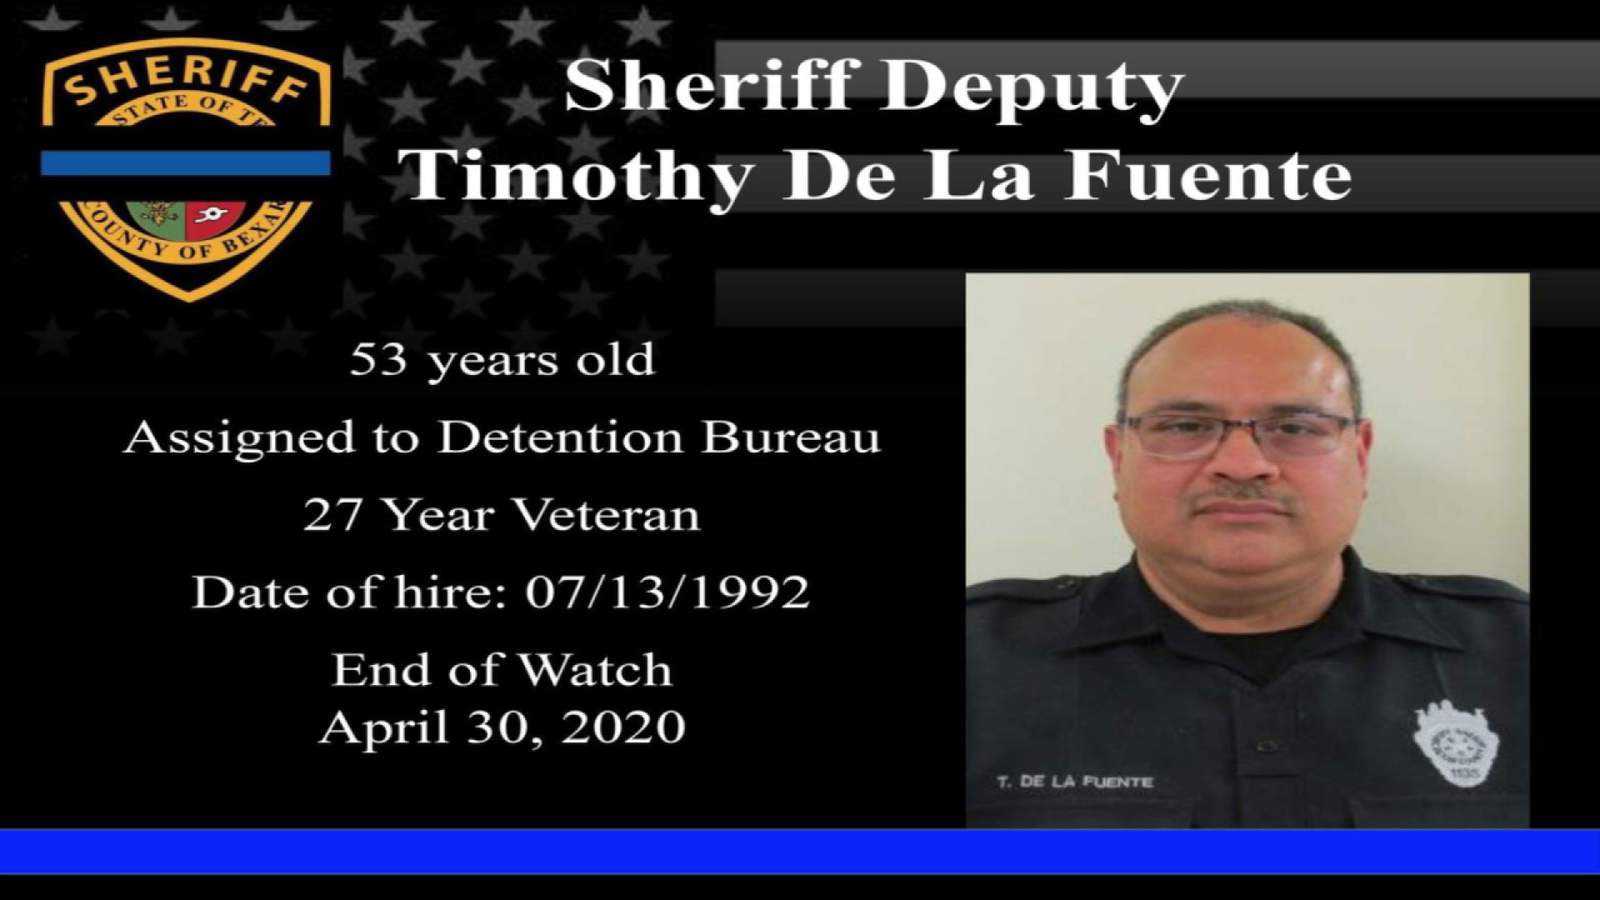 Funeral procession and honor escort for fallen Bexar County Deputy to take place Monday